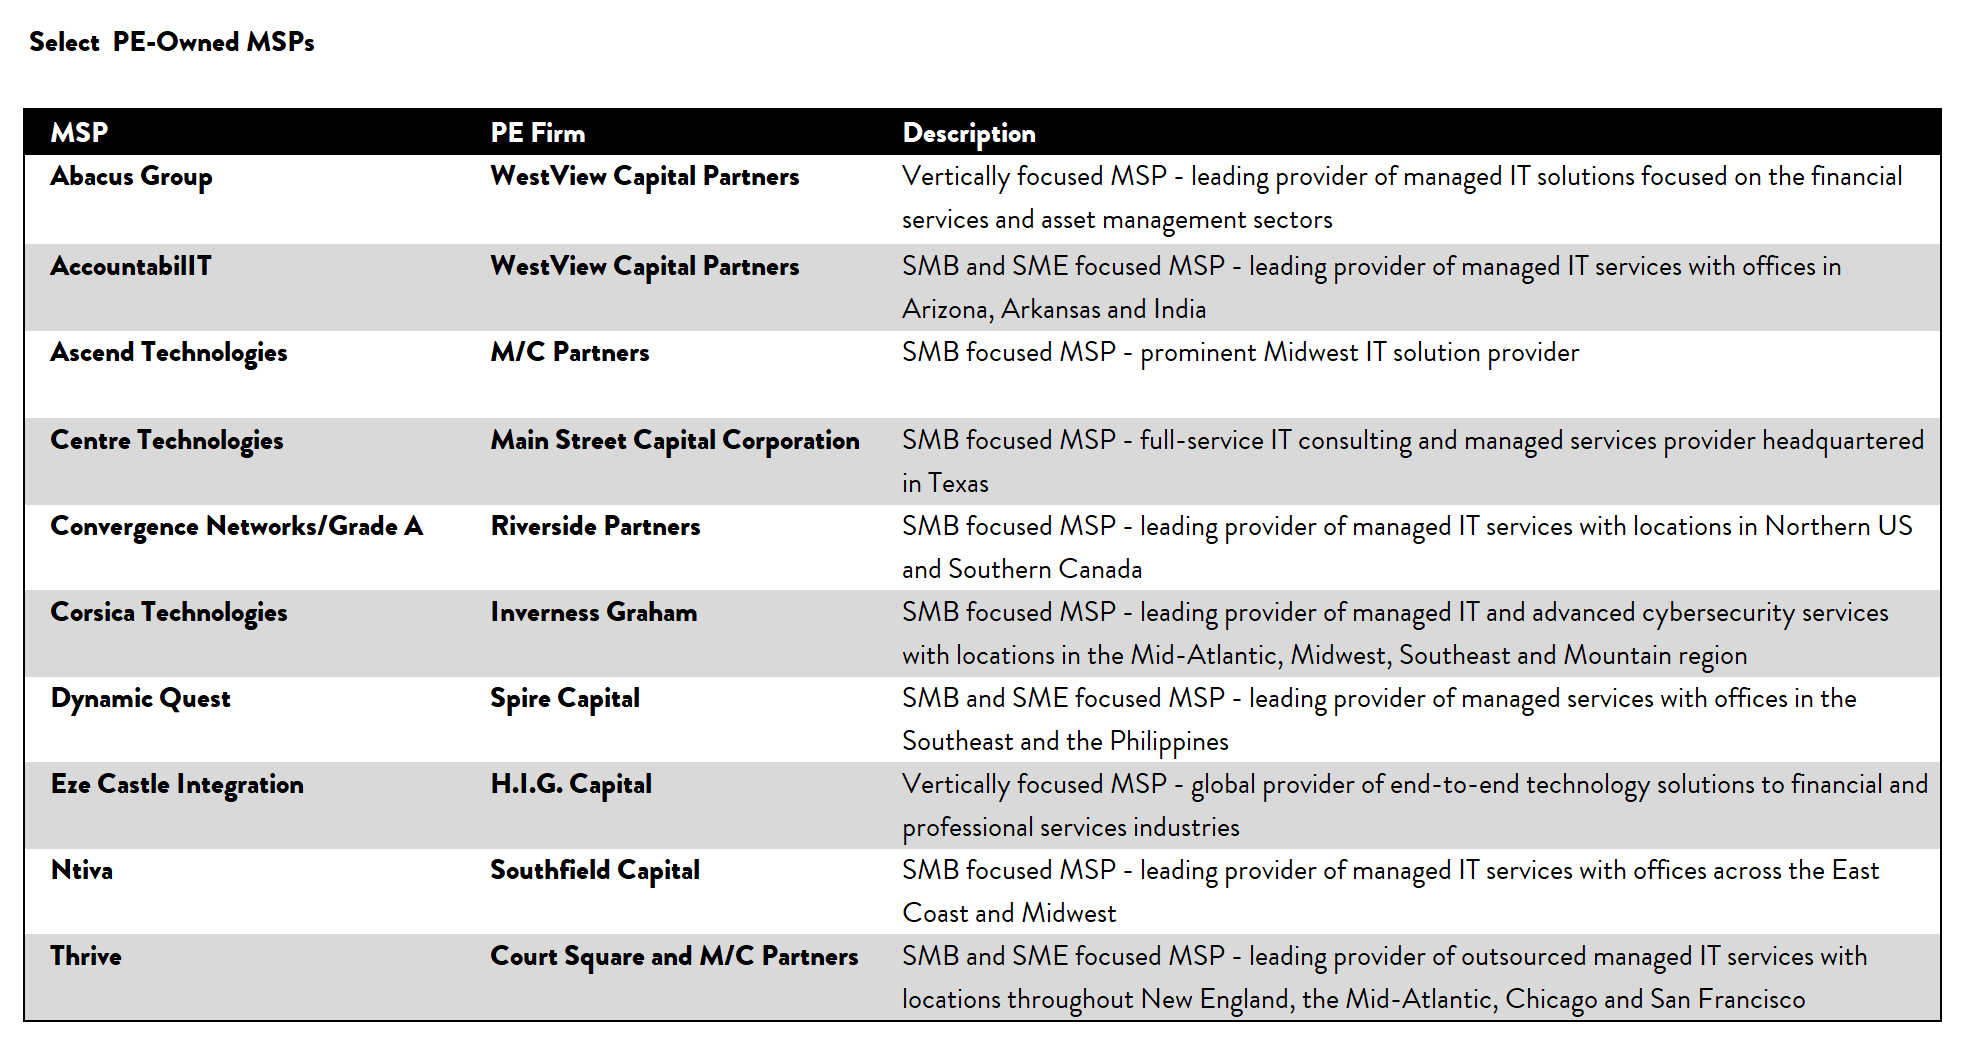 a selection of private equity-owned MSPs